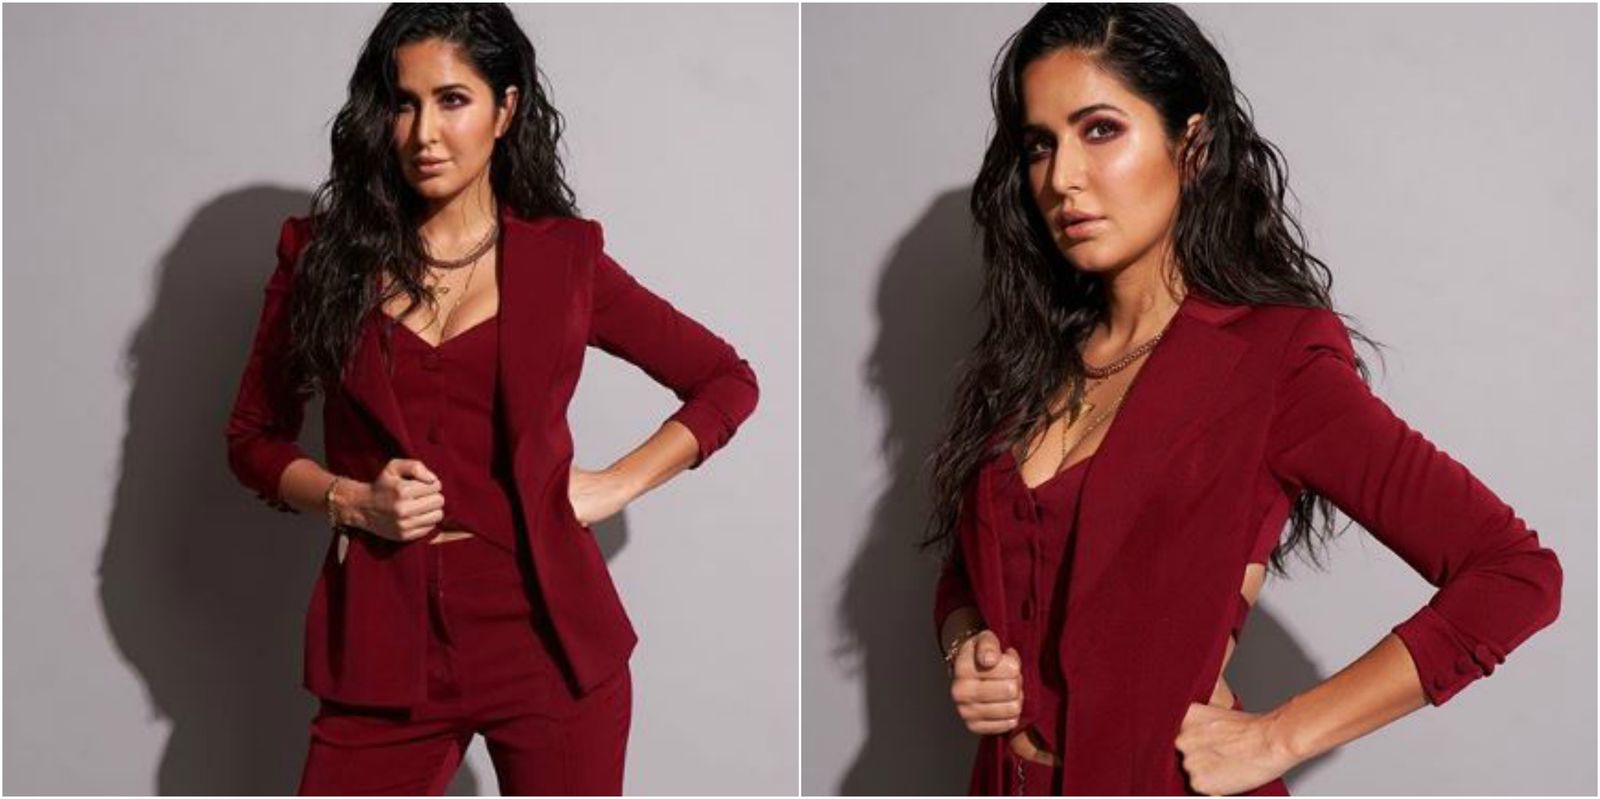 Katrina Kaif's Classy Meets Edgy Look Can Be Yours, Here's How